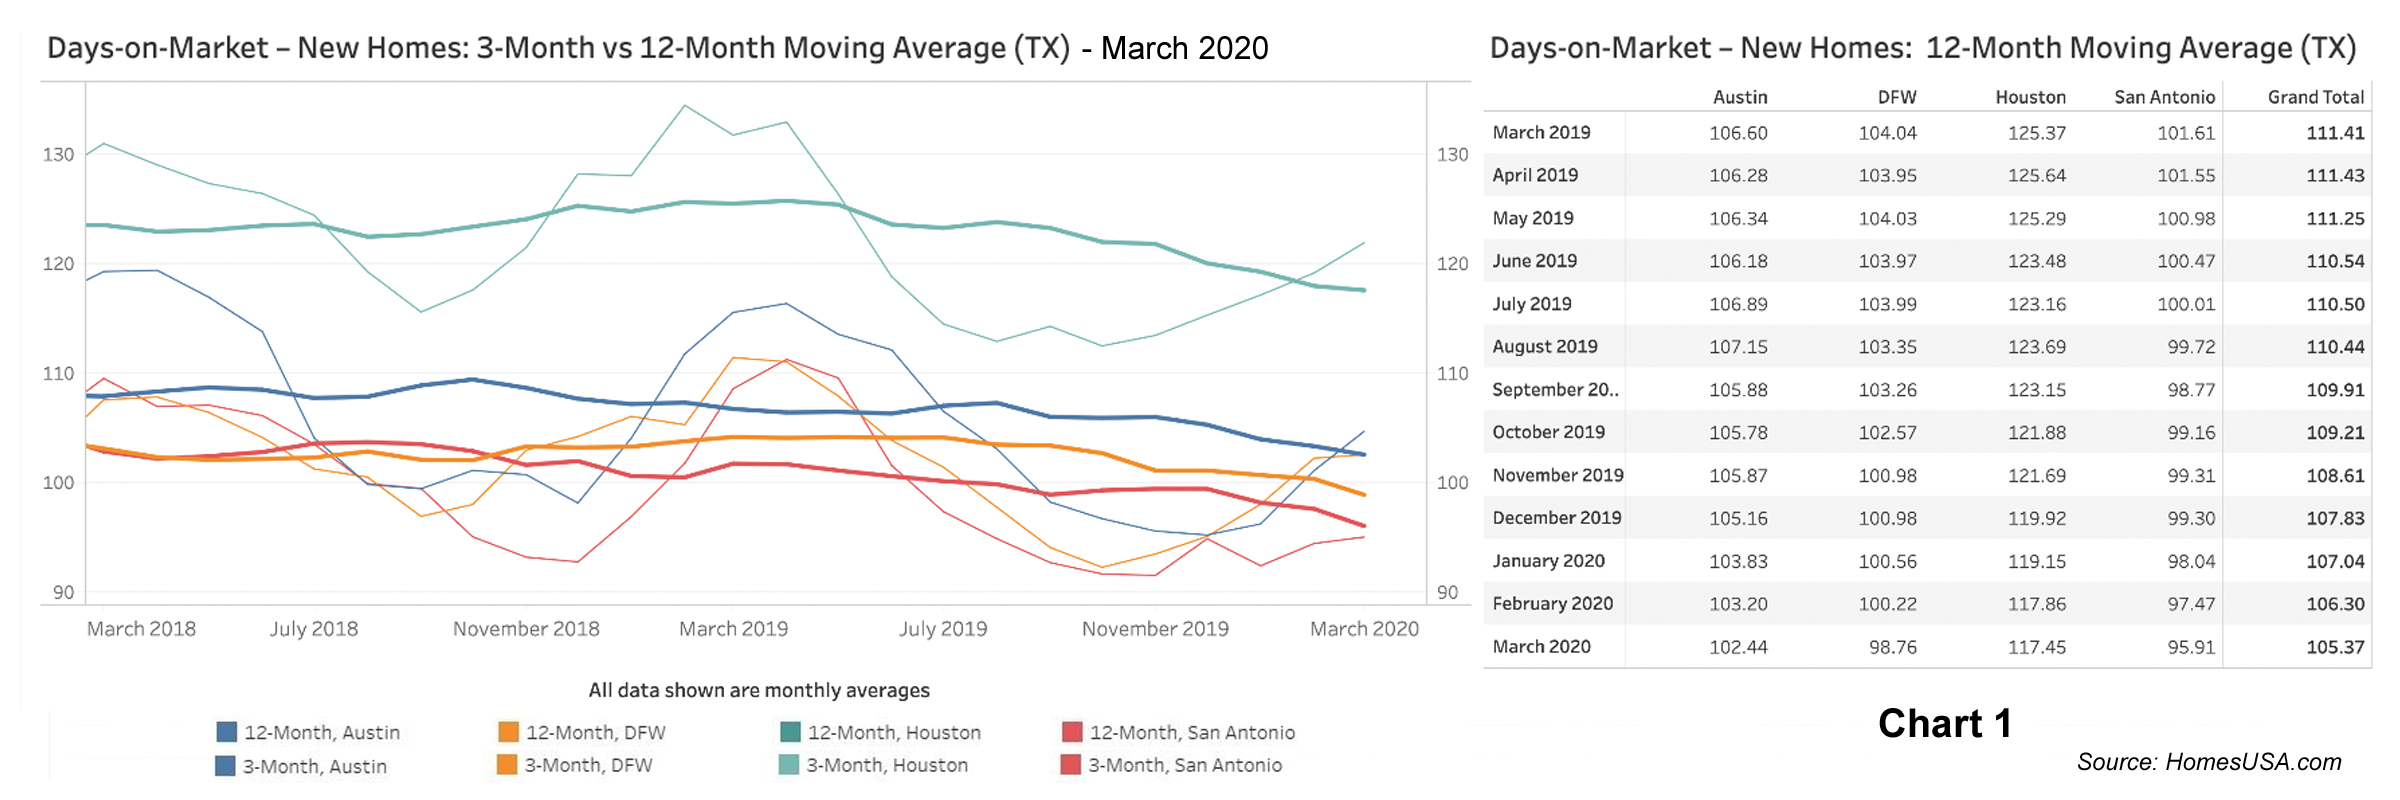 Chart 1: Texas New Homes: Days on Market - March 2020